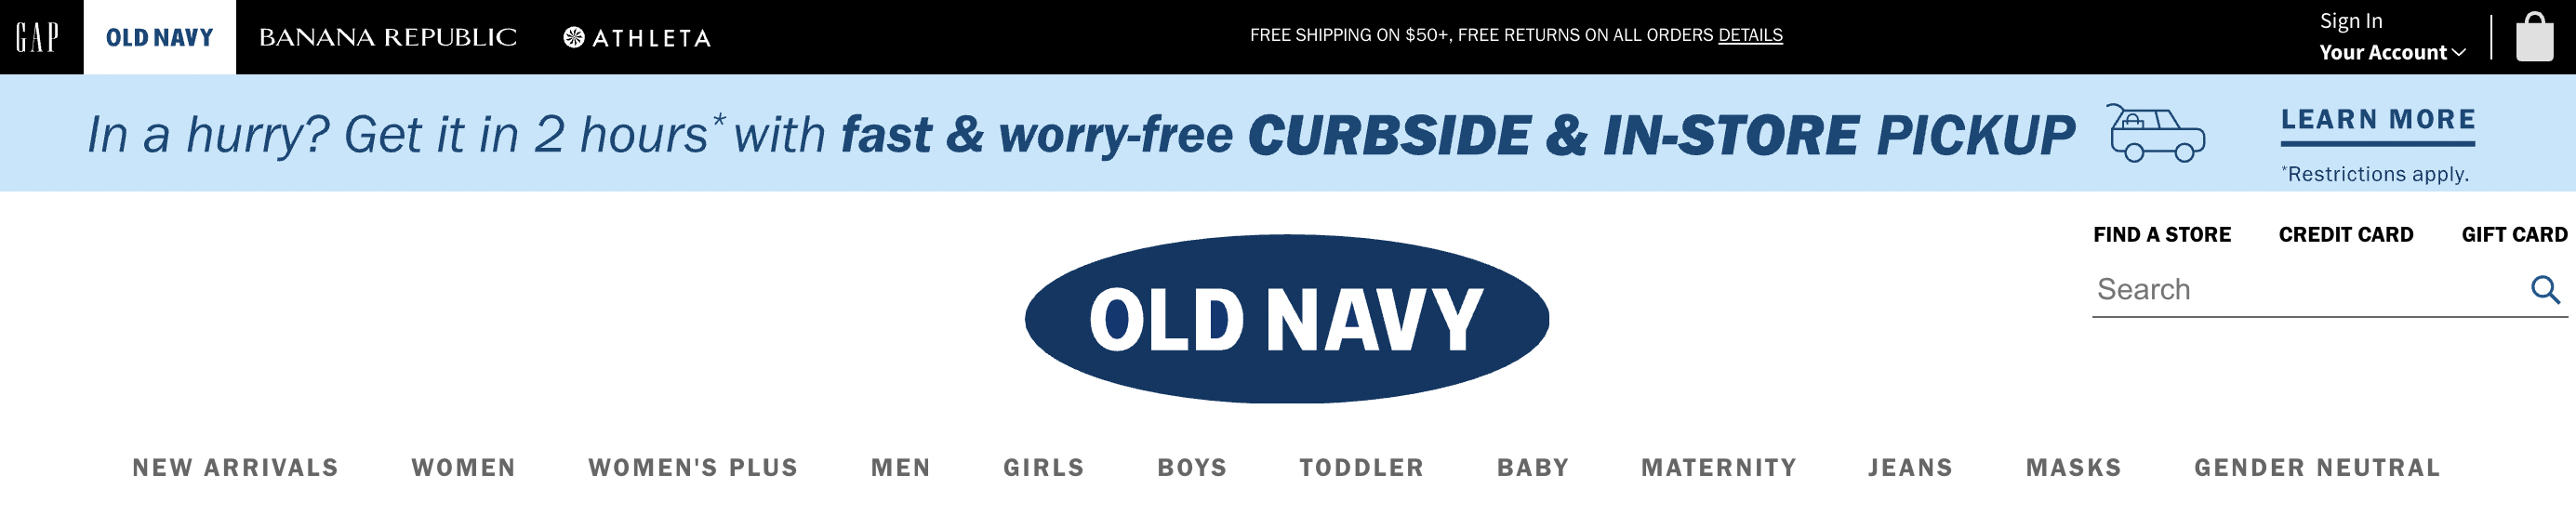 old navy notification banner